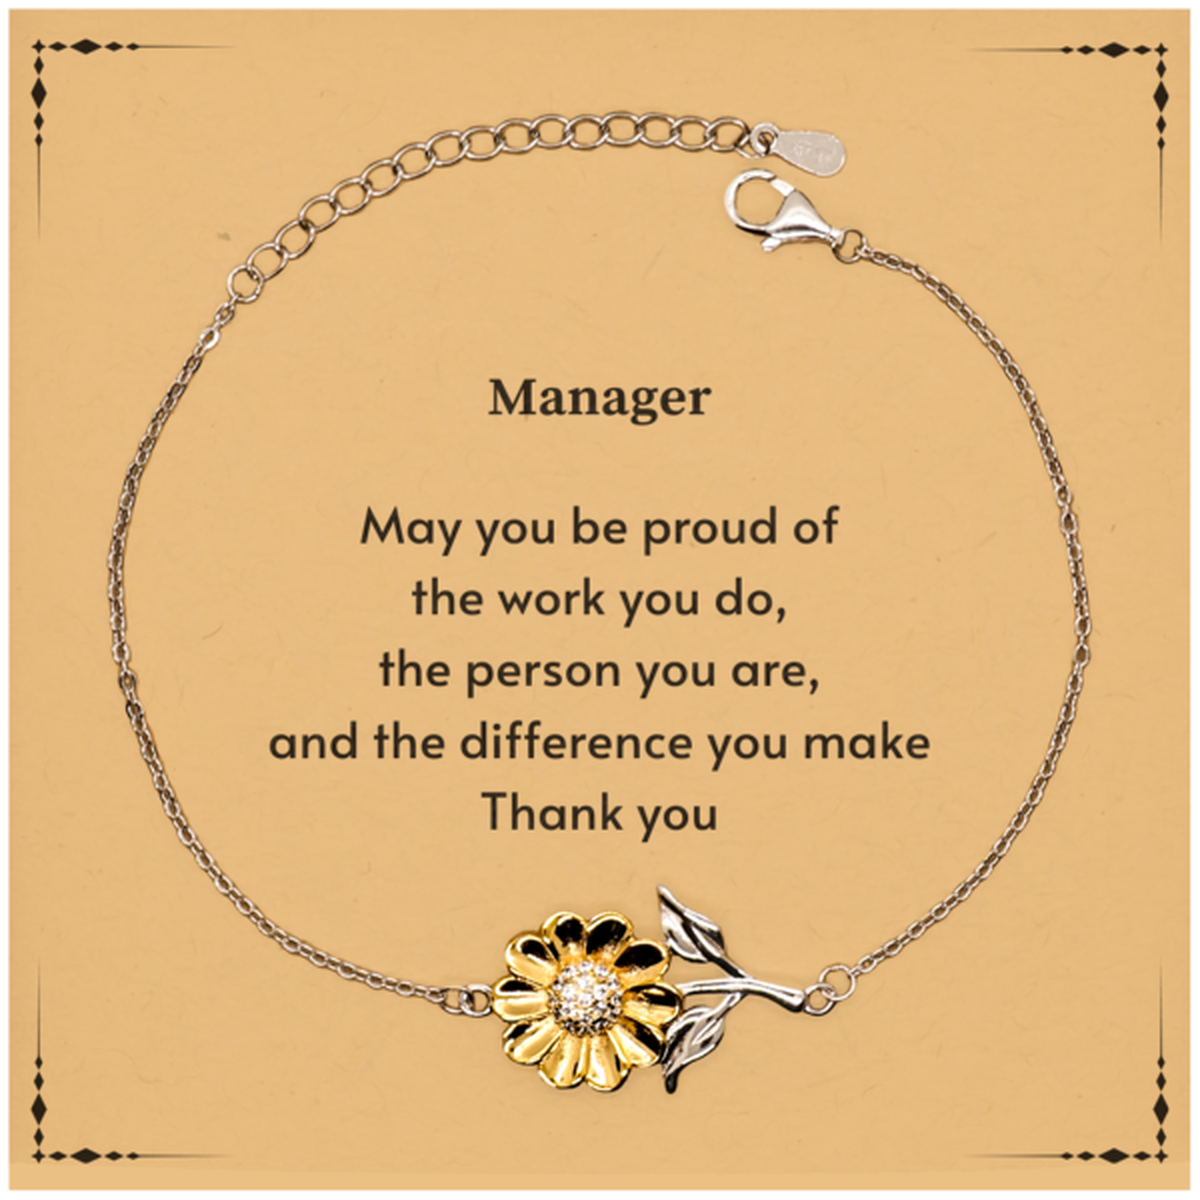 Heartwarming Sunflower Bracelet Retirement Coworkers Gifts for Manager, Manager May You be proud of the work you do, the person you are Gifts for Boss Men Women Friends